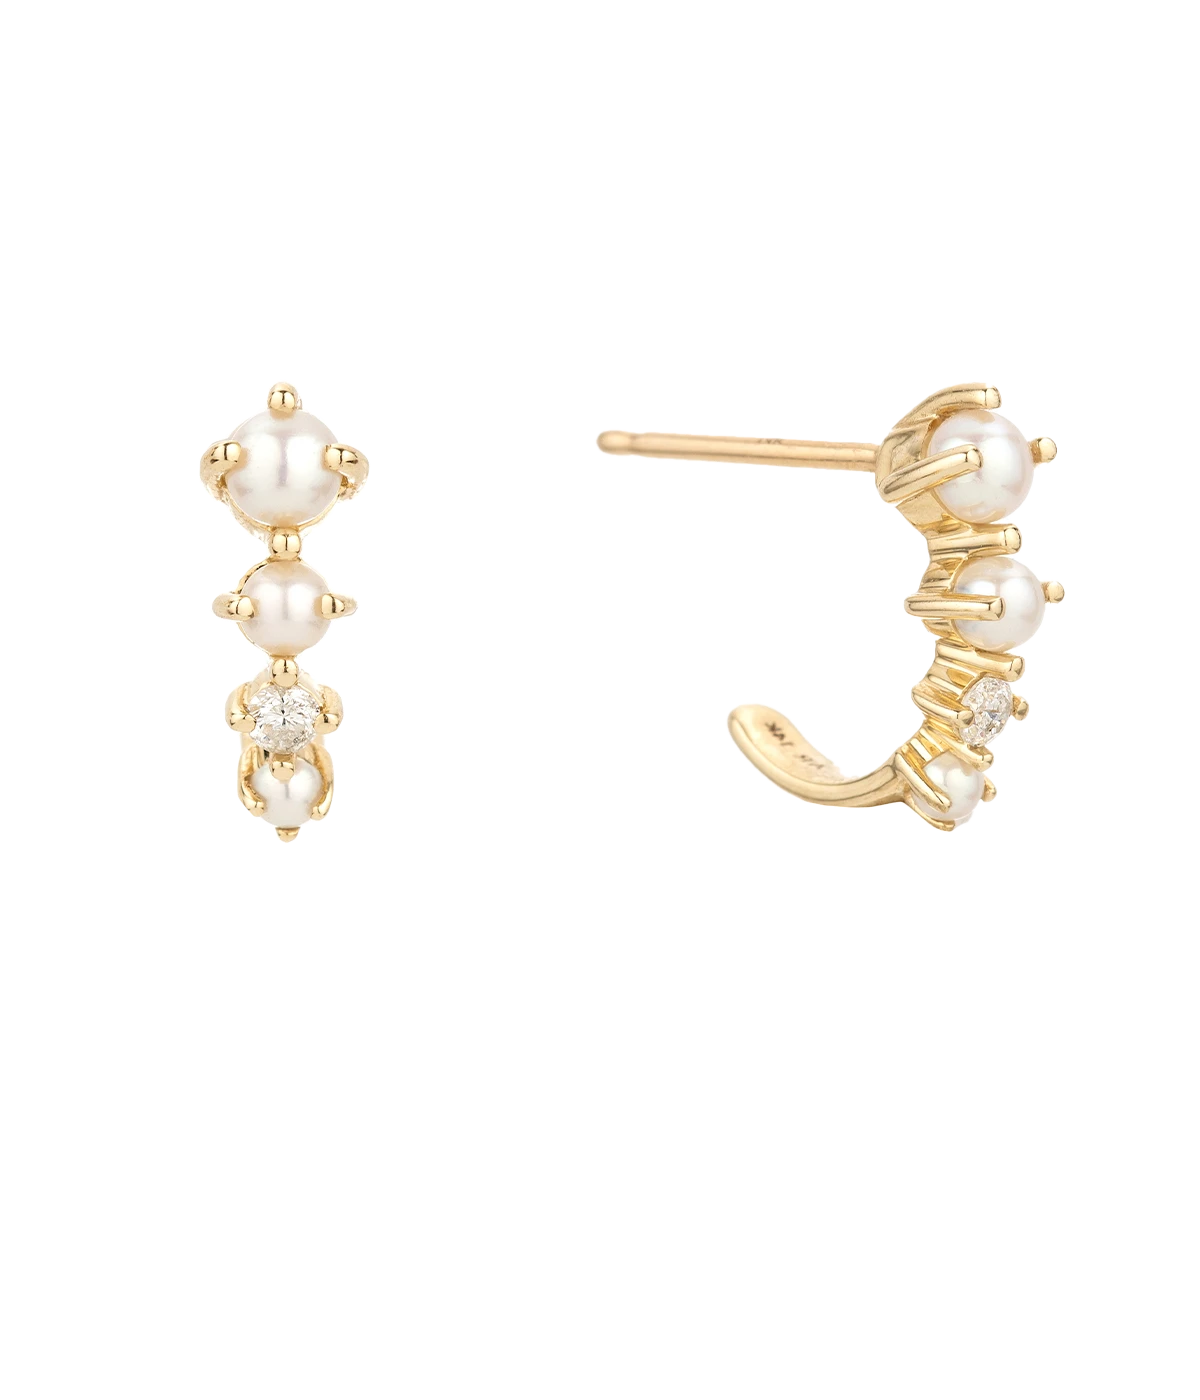 A delicate and dainty pair of j hoop earrings, these 14k yellow gold post graduated prong-set pearl and diamond earrings hug the ear. Fine jewellery, yellow gold jewellery, every day wear, minimal jewellery.